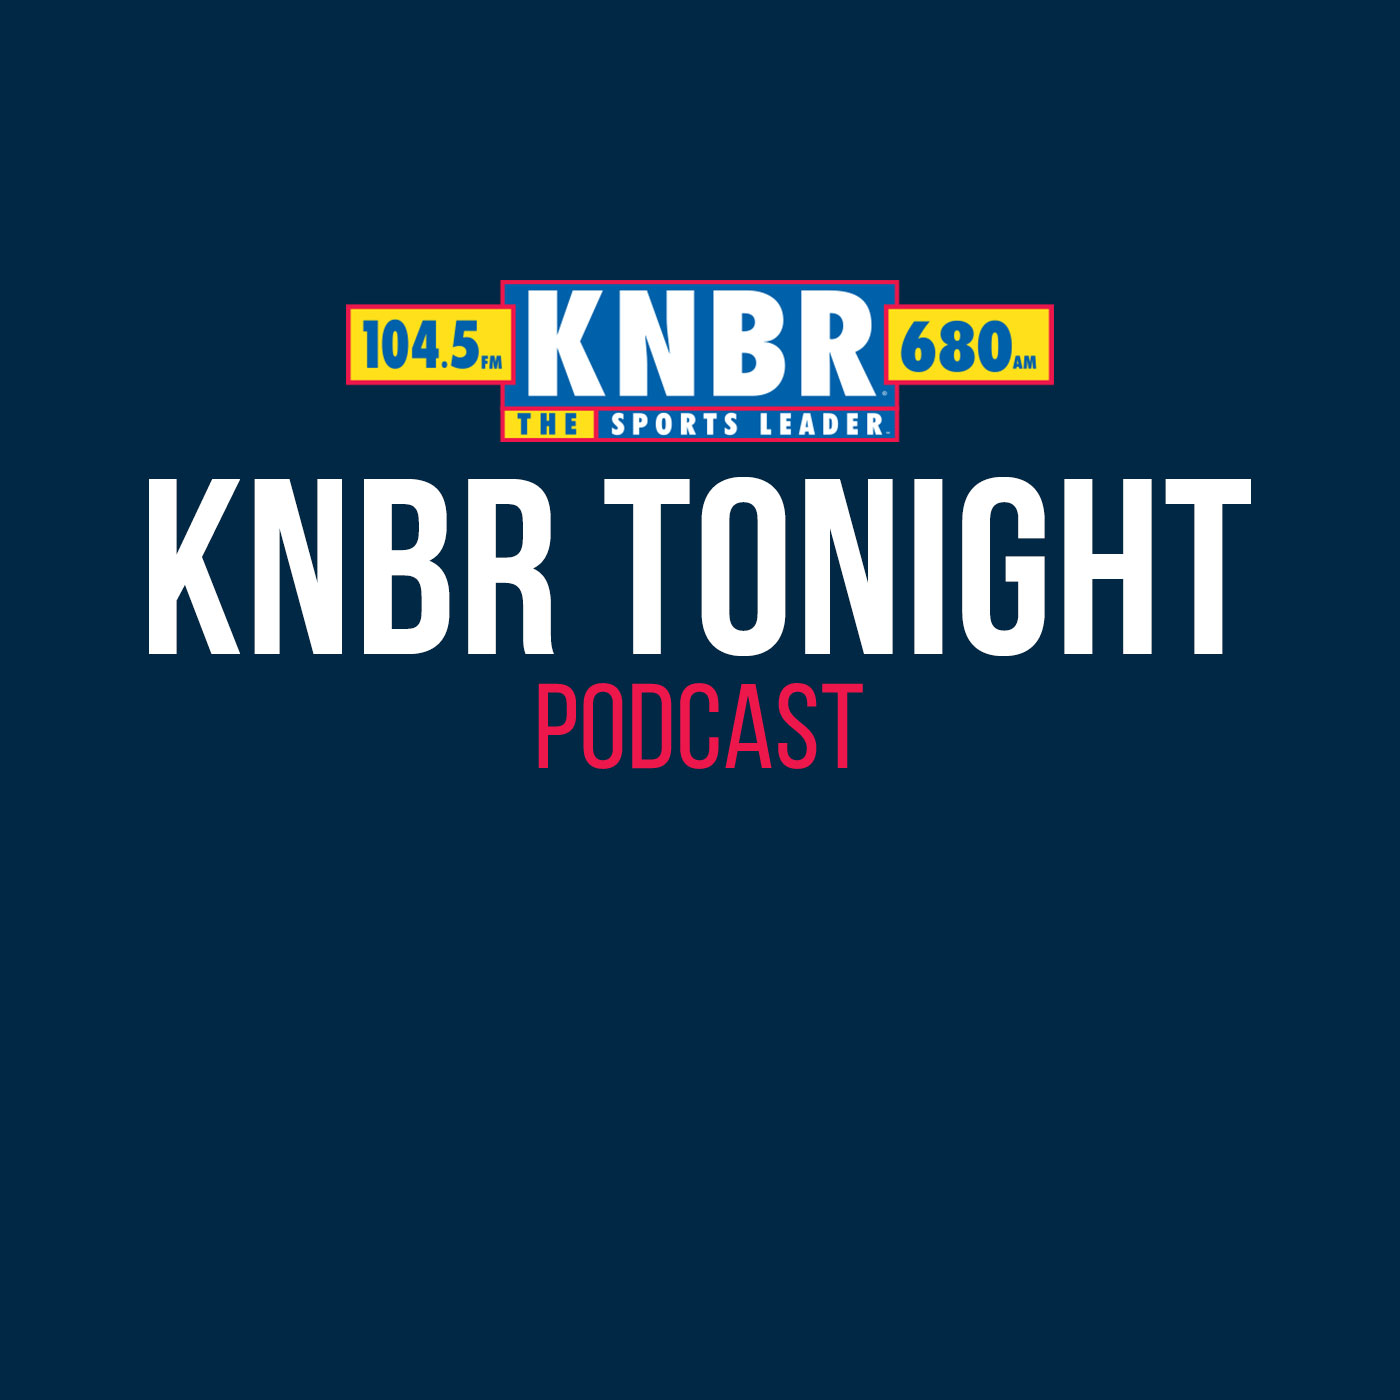 2-18 Evan Webeck joins KNBR Tonight with Dieter to talk about when we might see Draymond and/or Wiseman in a Warriors game